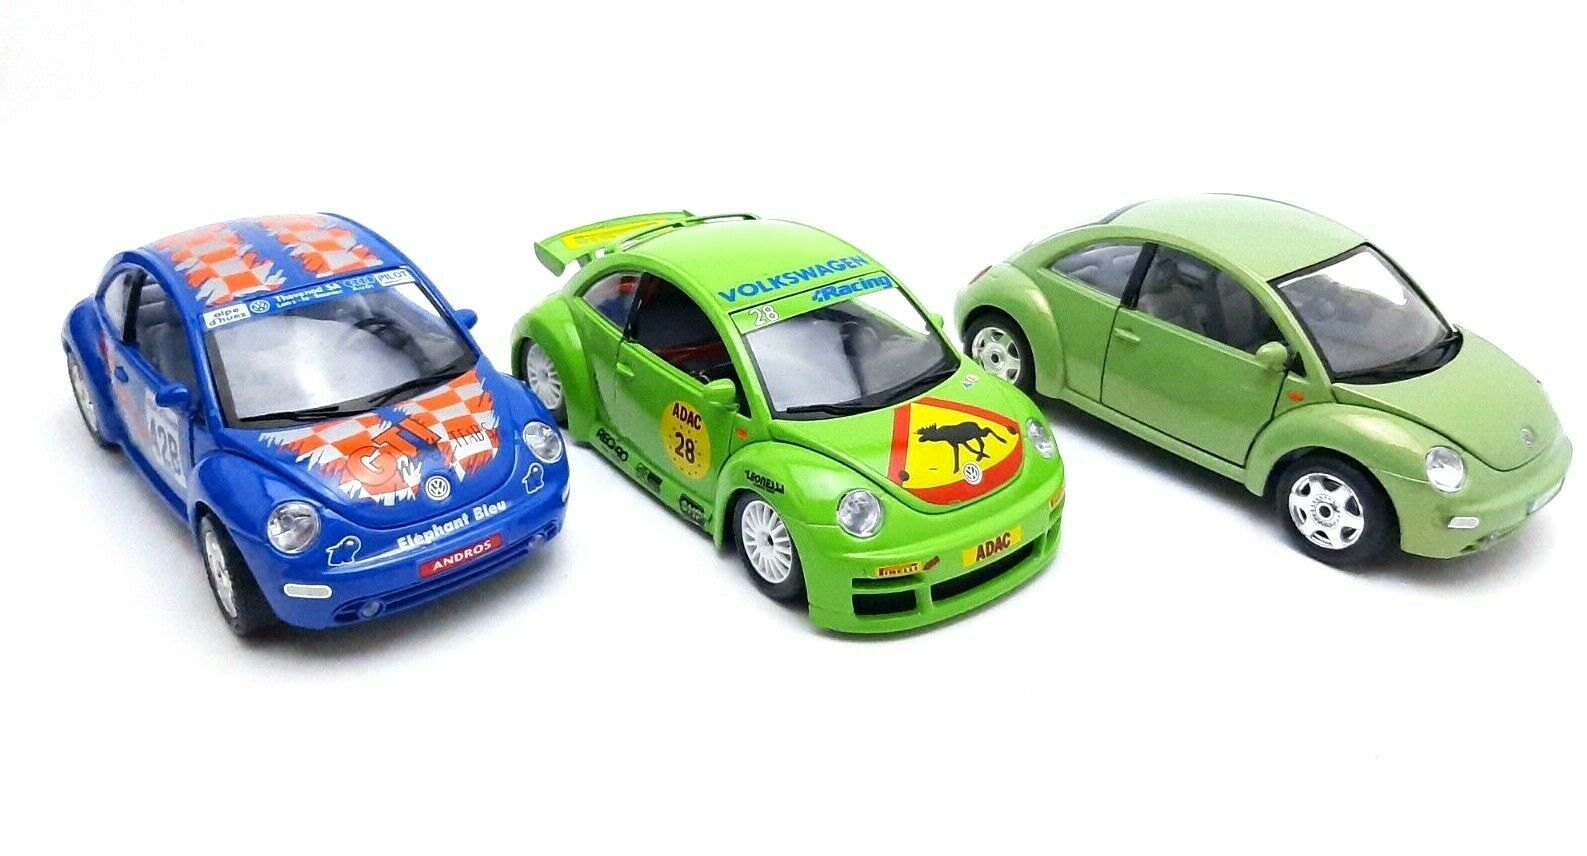 Bburage 1:24 New Beetle Cup 1999 Race and Stock lot x3 Diecast Car  - $28.95